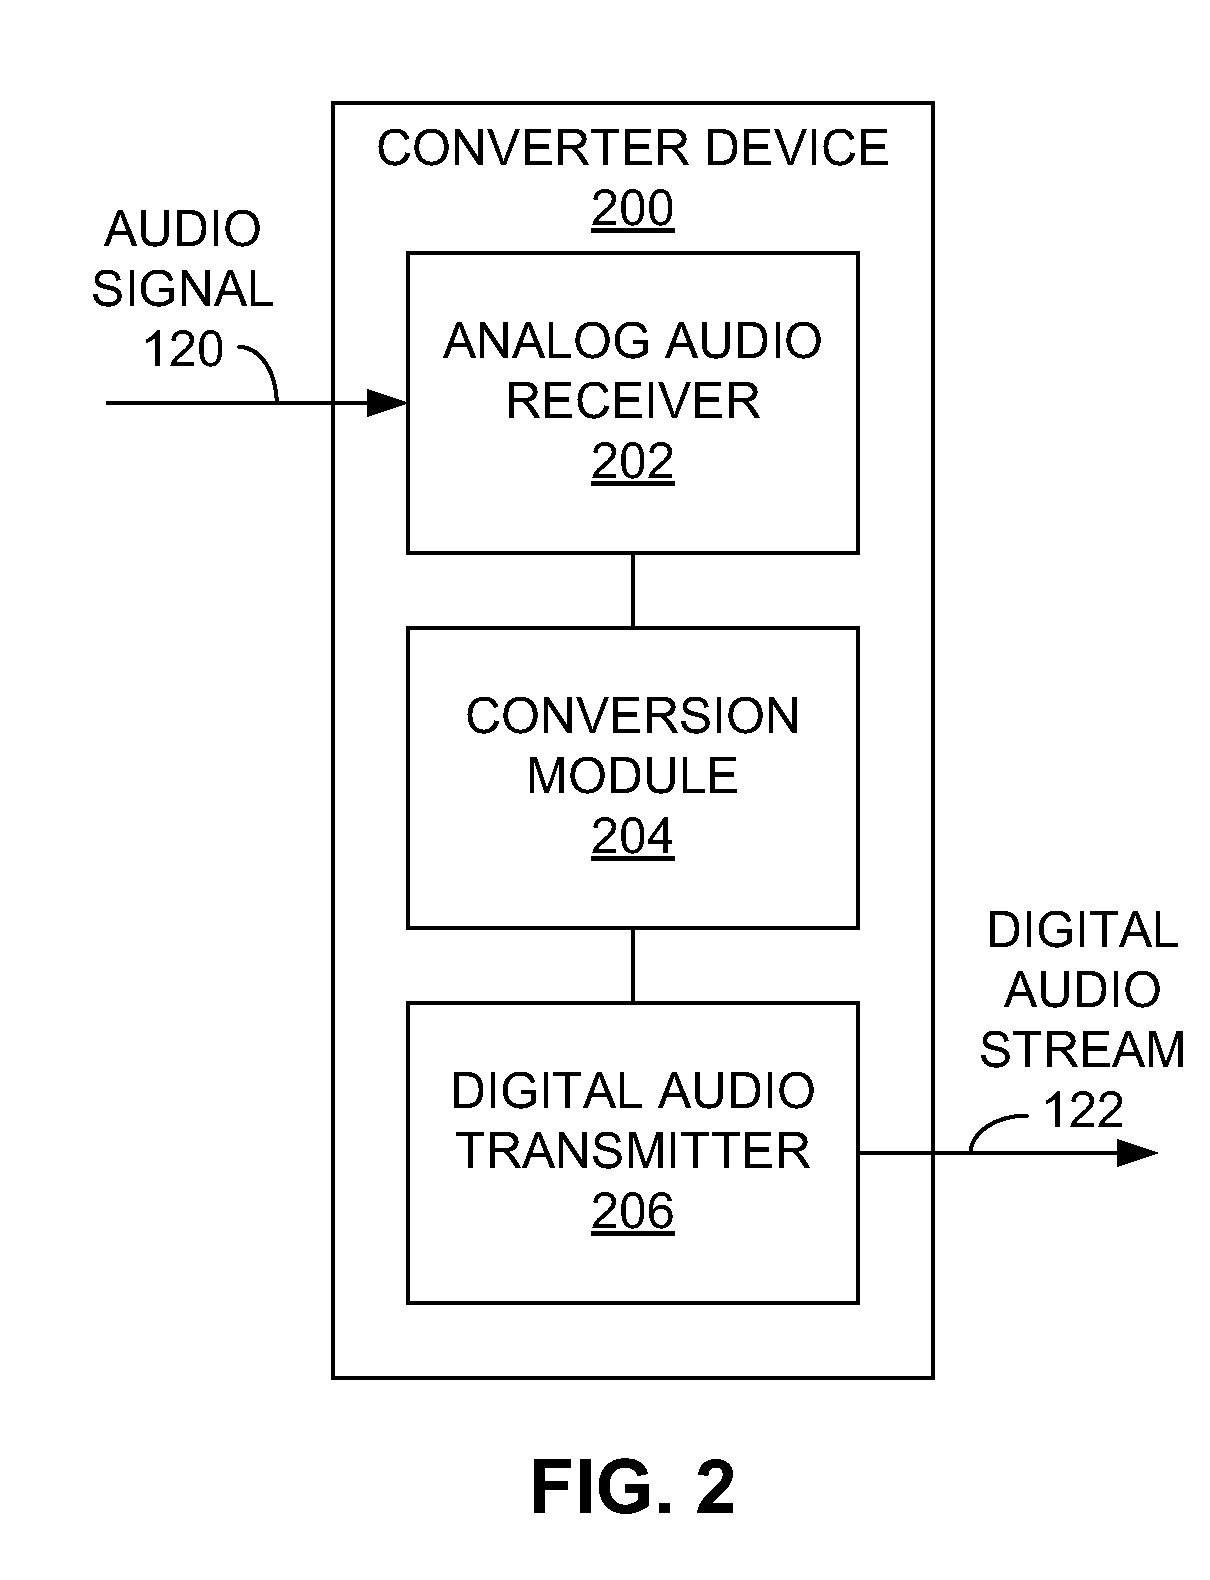 Venue-oriented social functionality via a mobile communication device